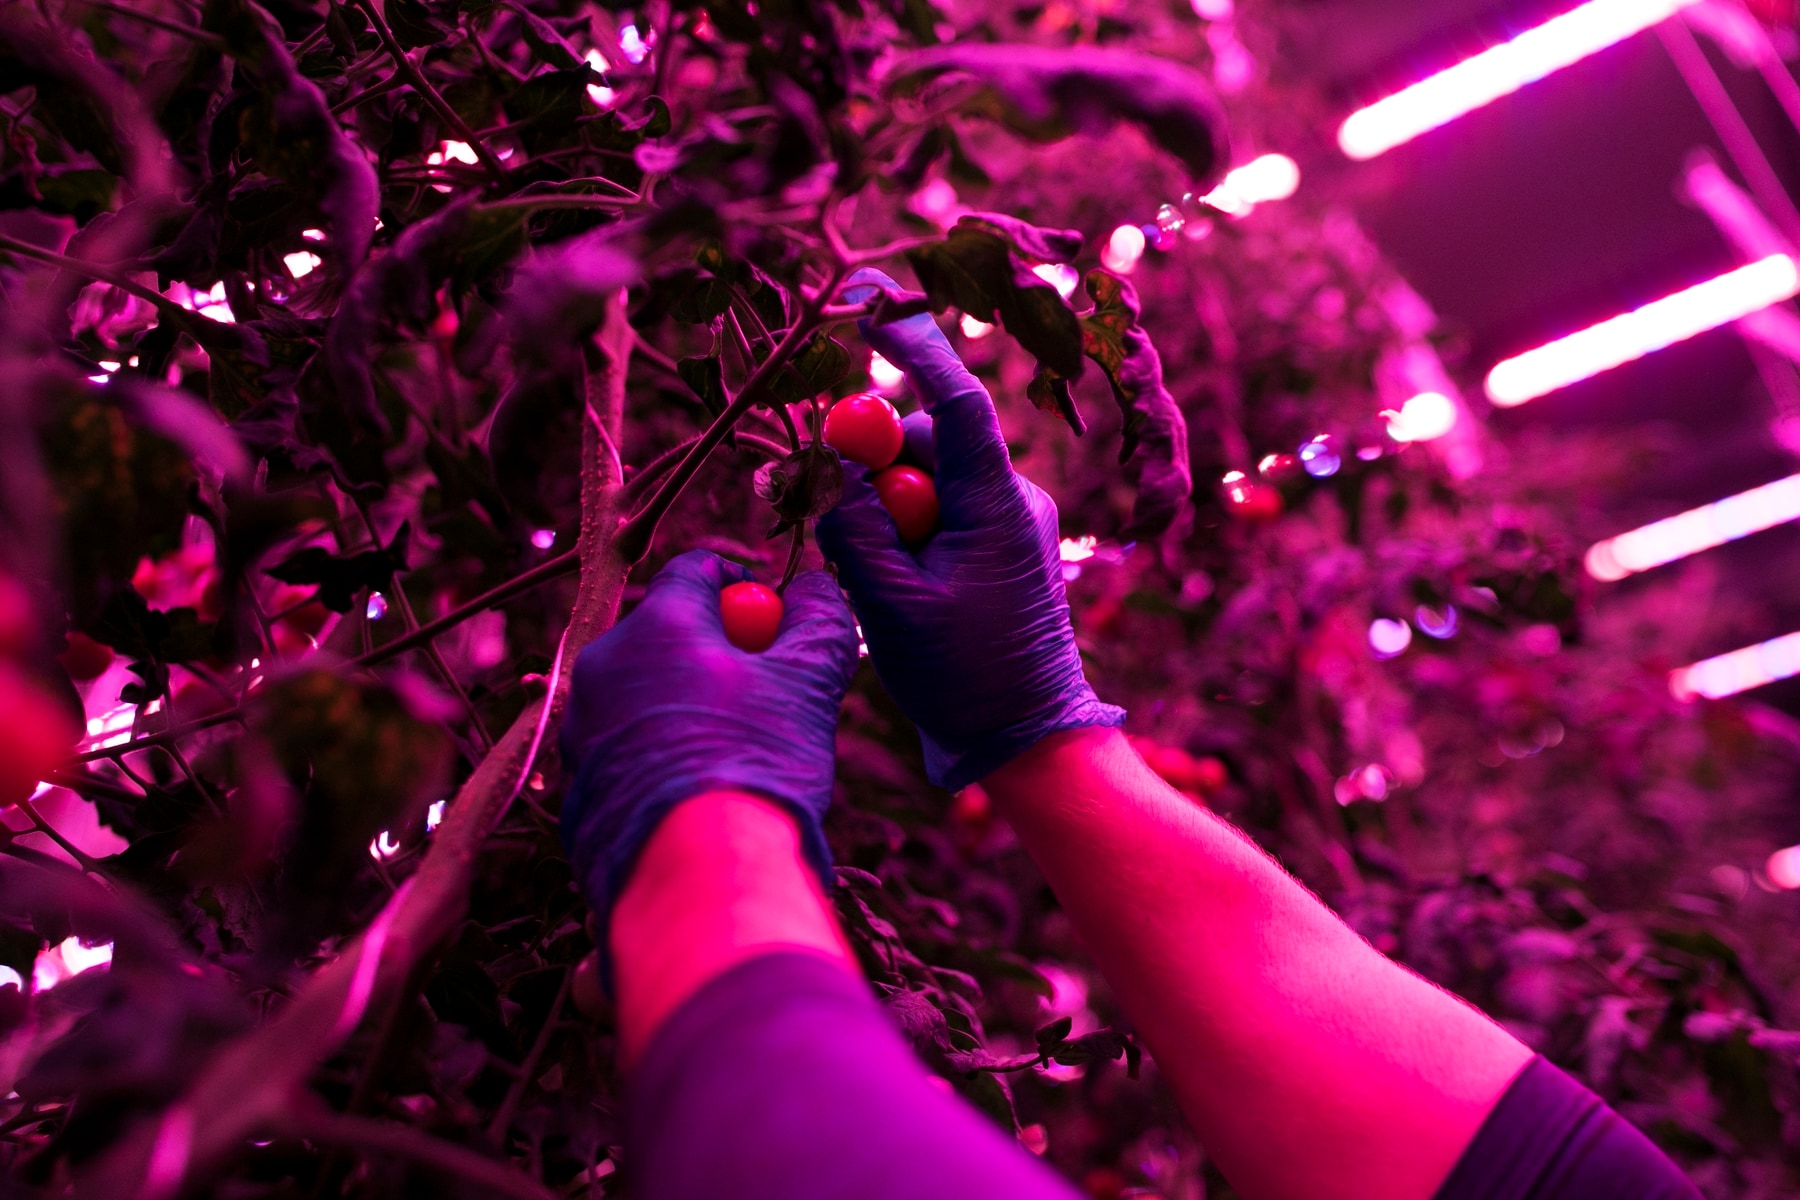 Grower David Litvin picks tomatoes at 80 Acres Farms in Cincinnati. The vines grow in a high-tech environment that includes LED lamps with customized light recipes. The plant factory produces 200,000 pounds of leafy greens, vine crops, herbs and mic…